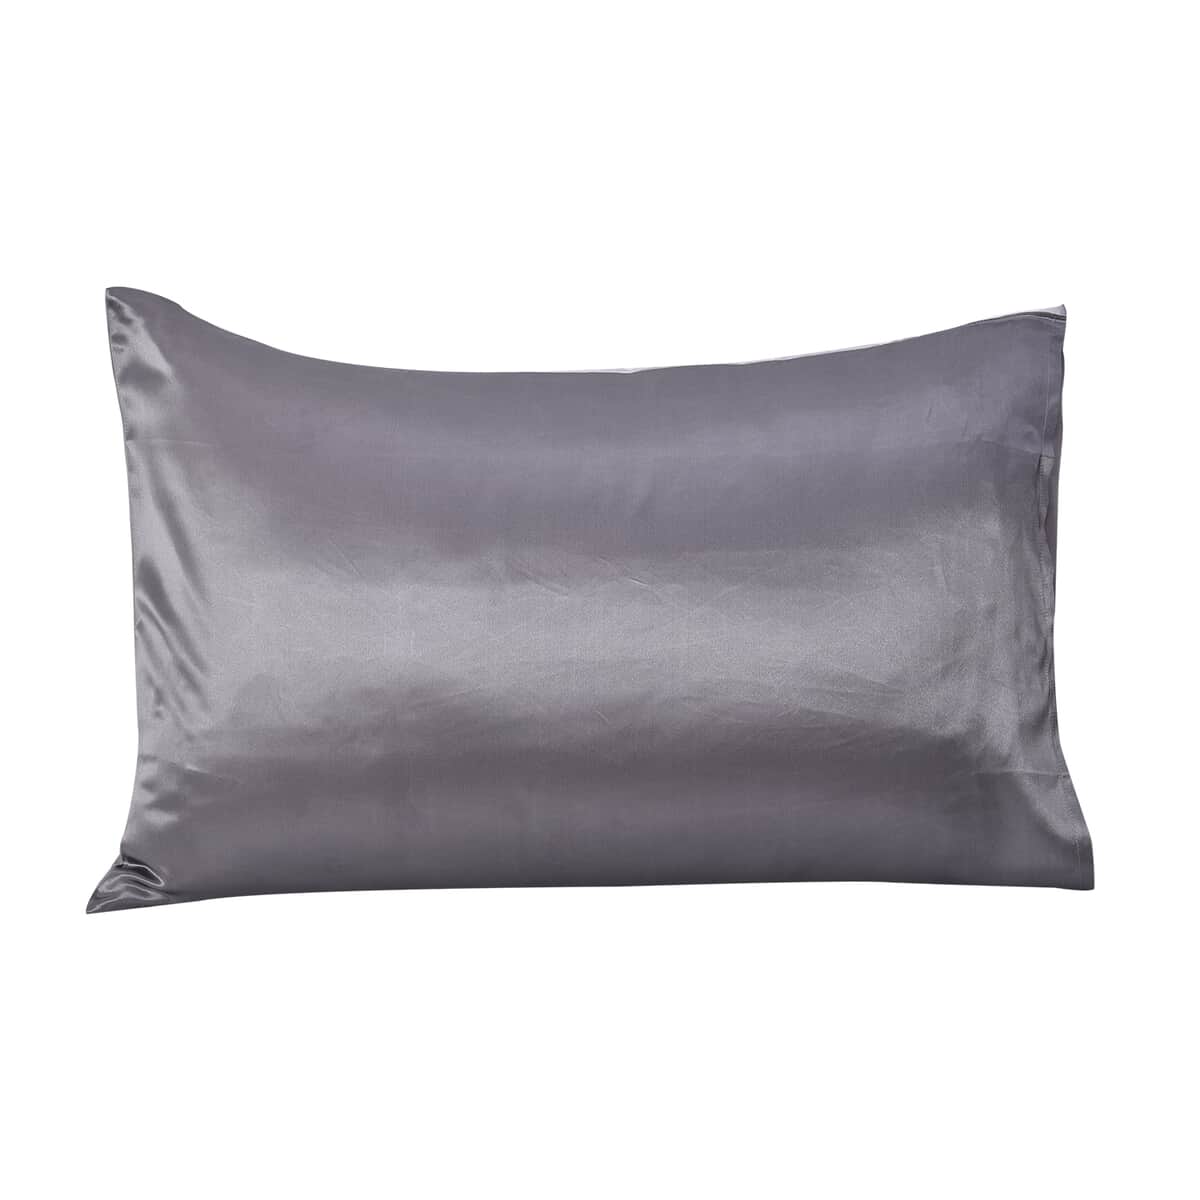 SYMPHONY HOME Gray 100% Mulberry Silk Pillowcase Infused with Hyaluronic Acid & Argan Oil - Full , Pillow Protectors , Pillow Cover , Cushion Cover , Pillow Shams , Pillow Case Covers image number 2